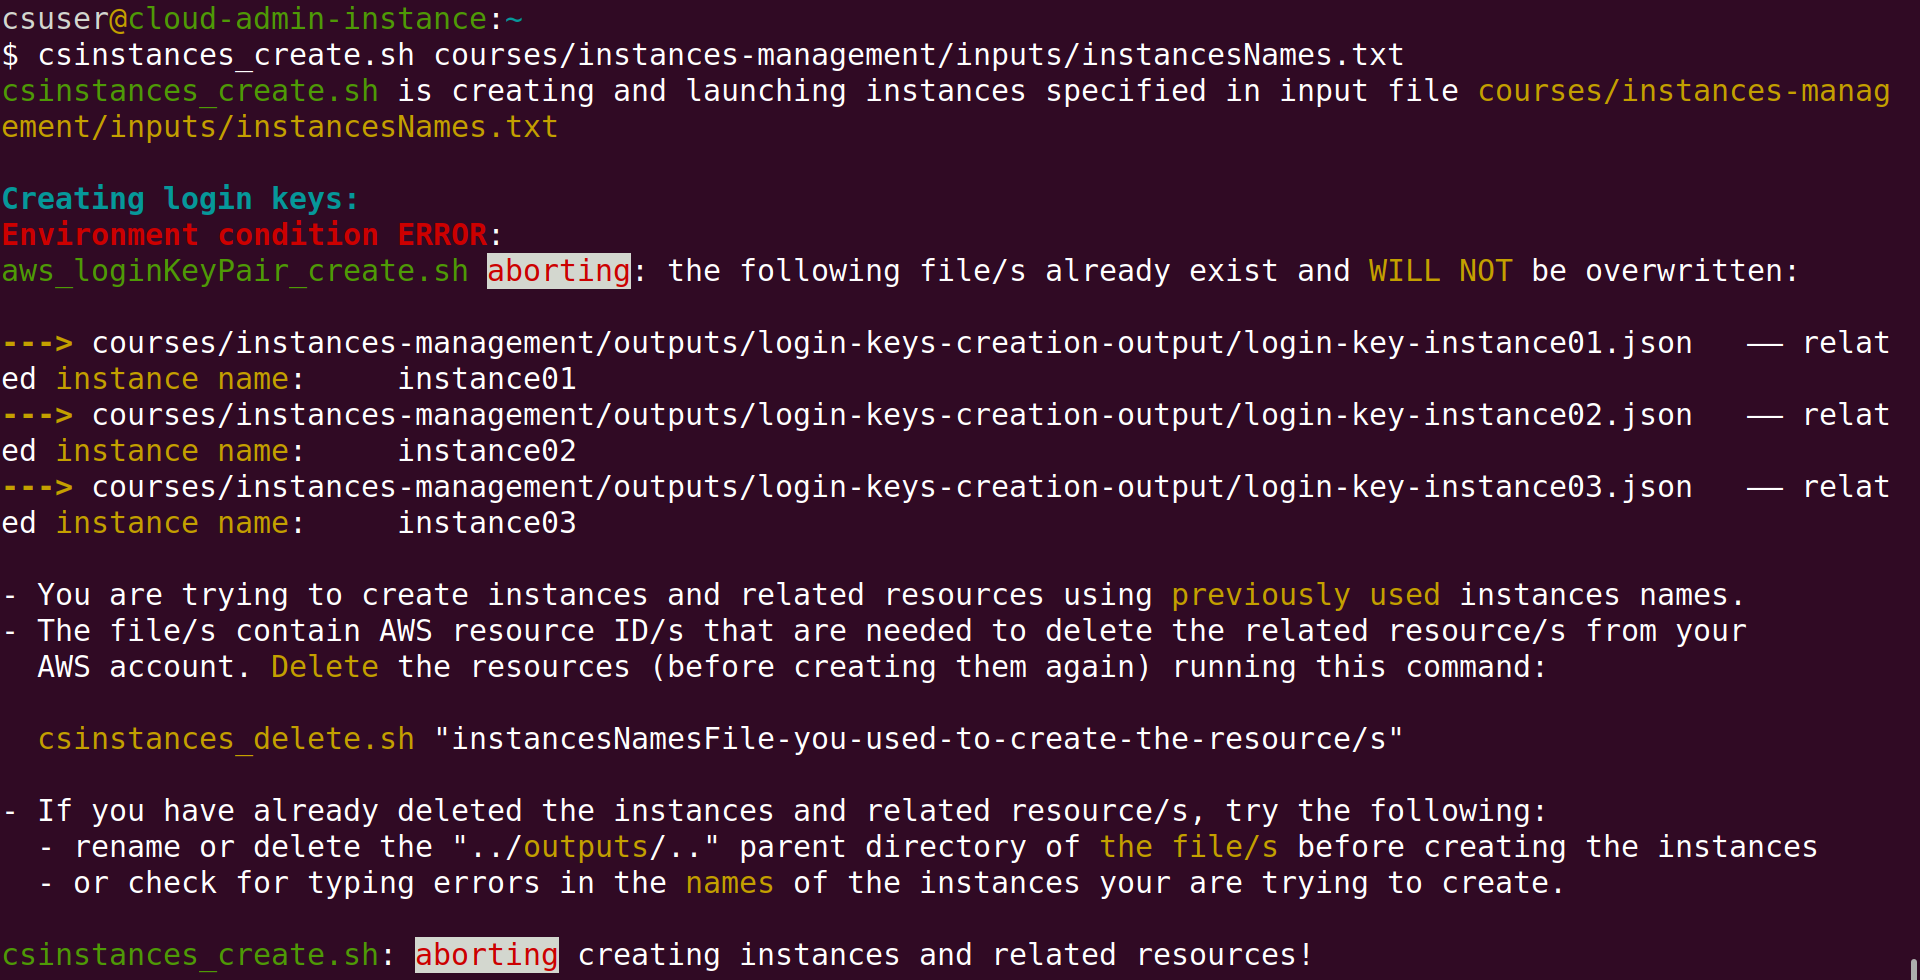 Screenshot of Linux terminal showing the run of csinstance_create.sh and the abort message for having found that some instances or related resources have already been created.